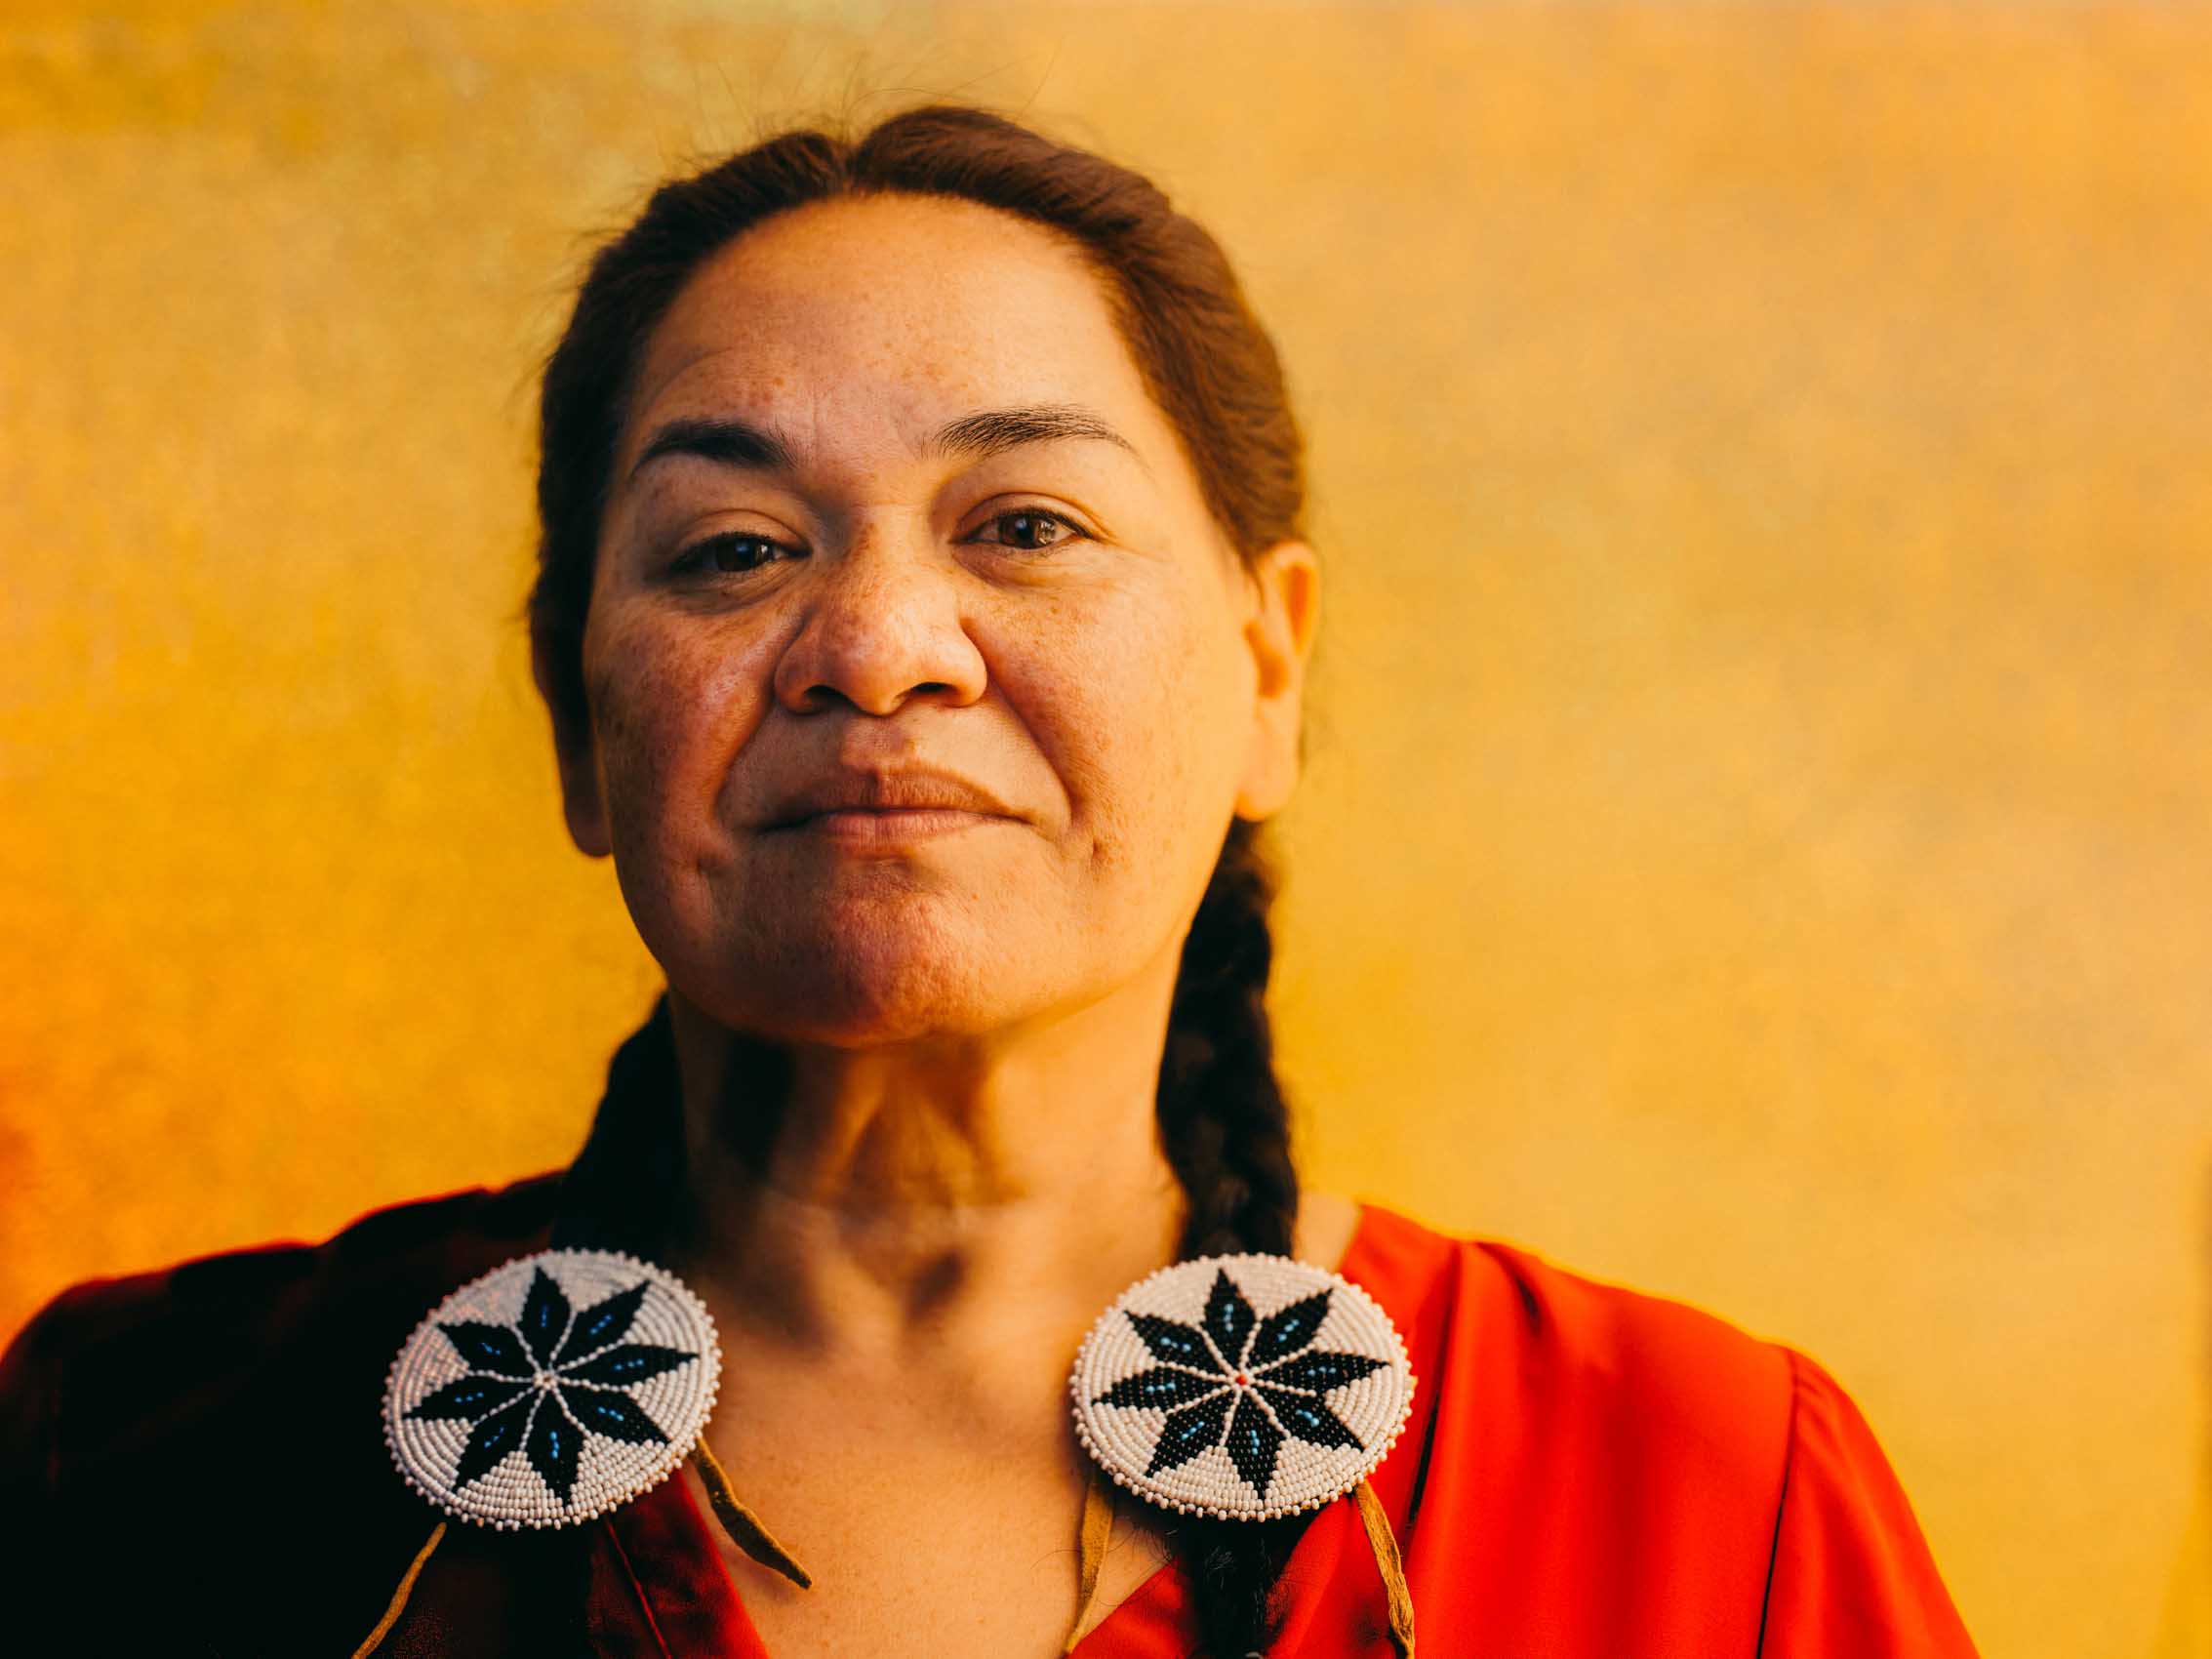 Portrait Of A Native American Woman With Heritage Jewelry